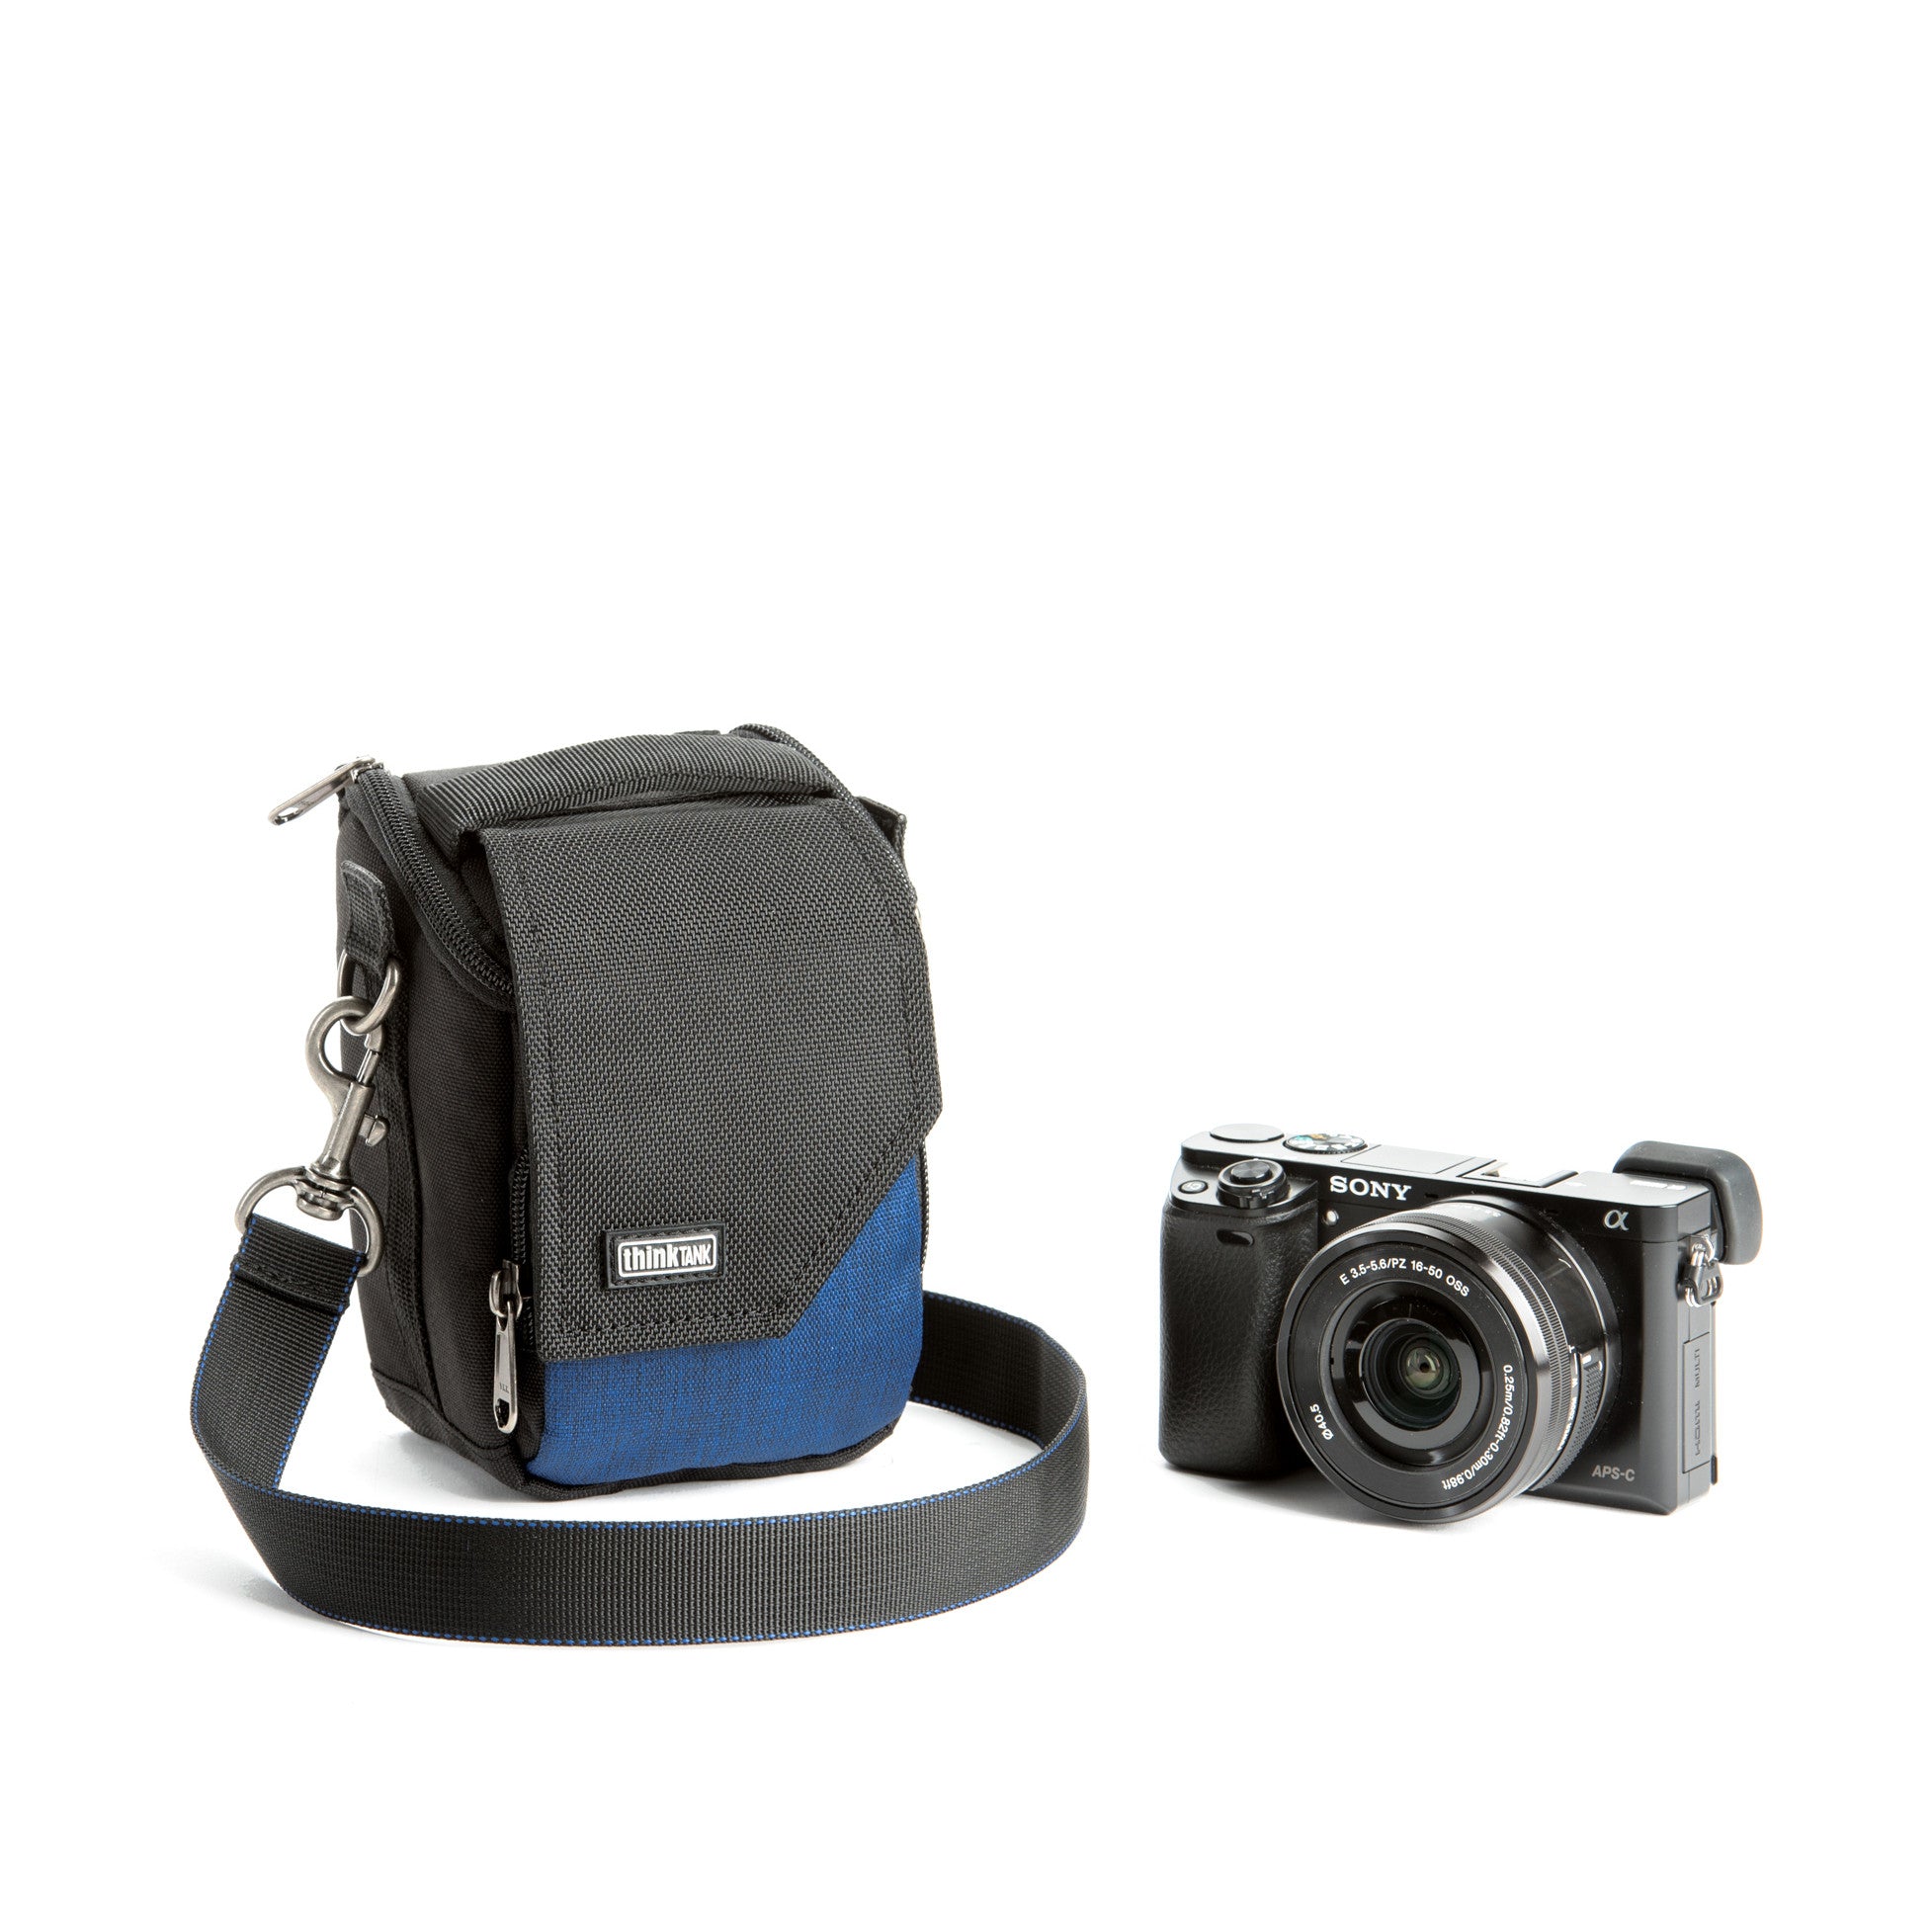 Think Tank - Best camera bags, shoulder bags, backpacks, and